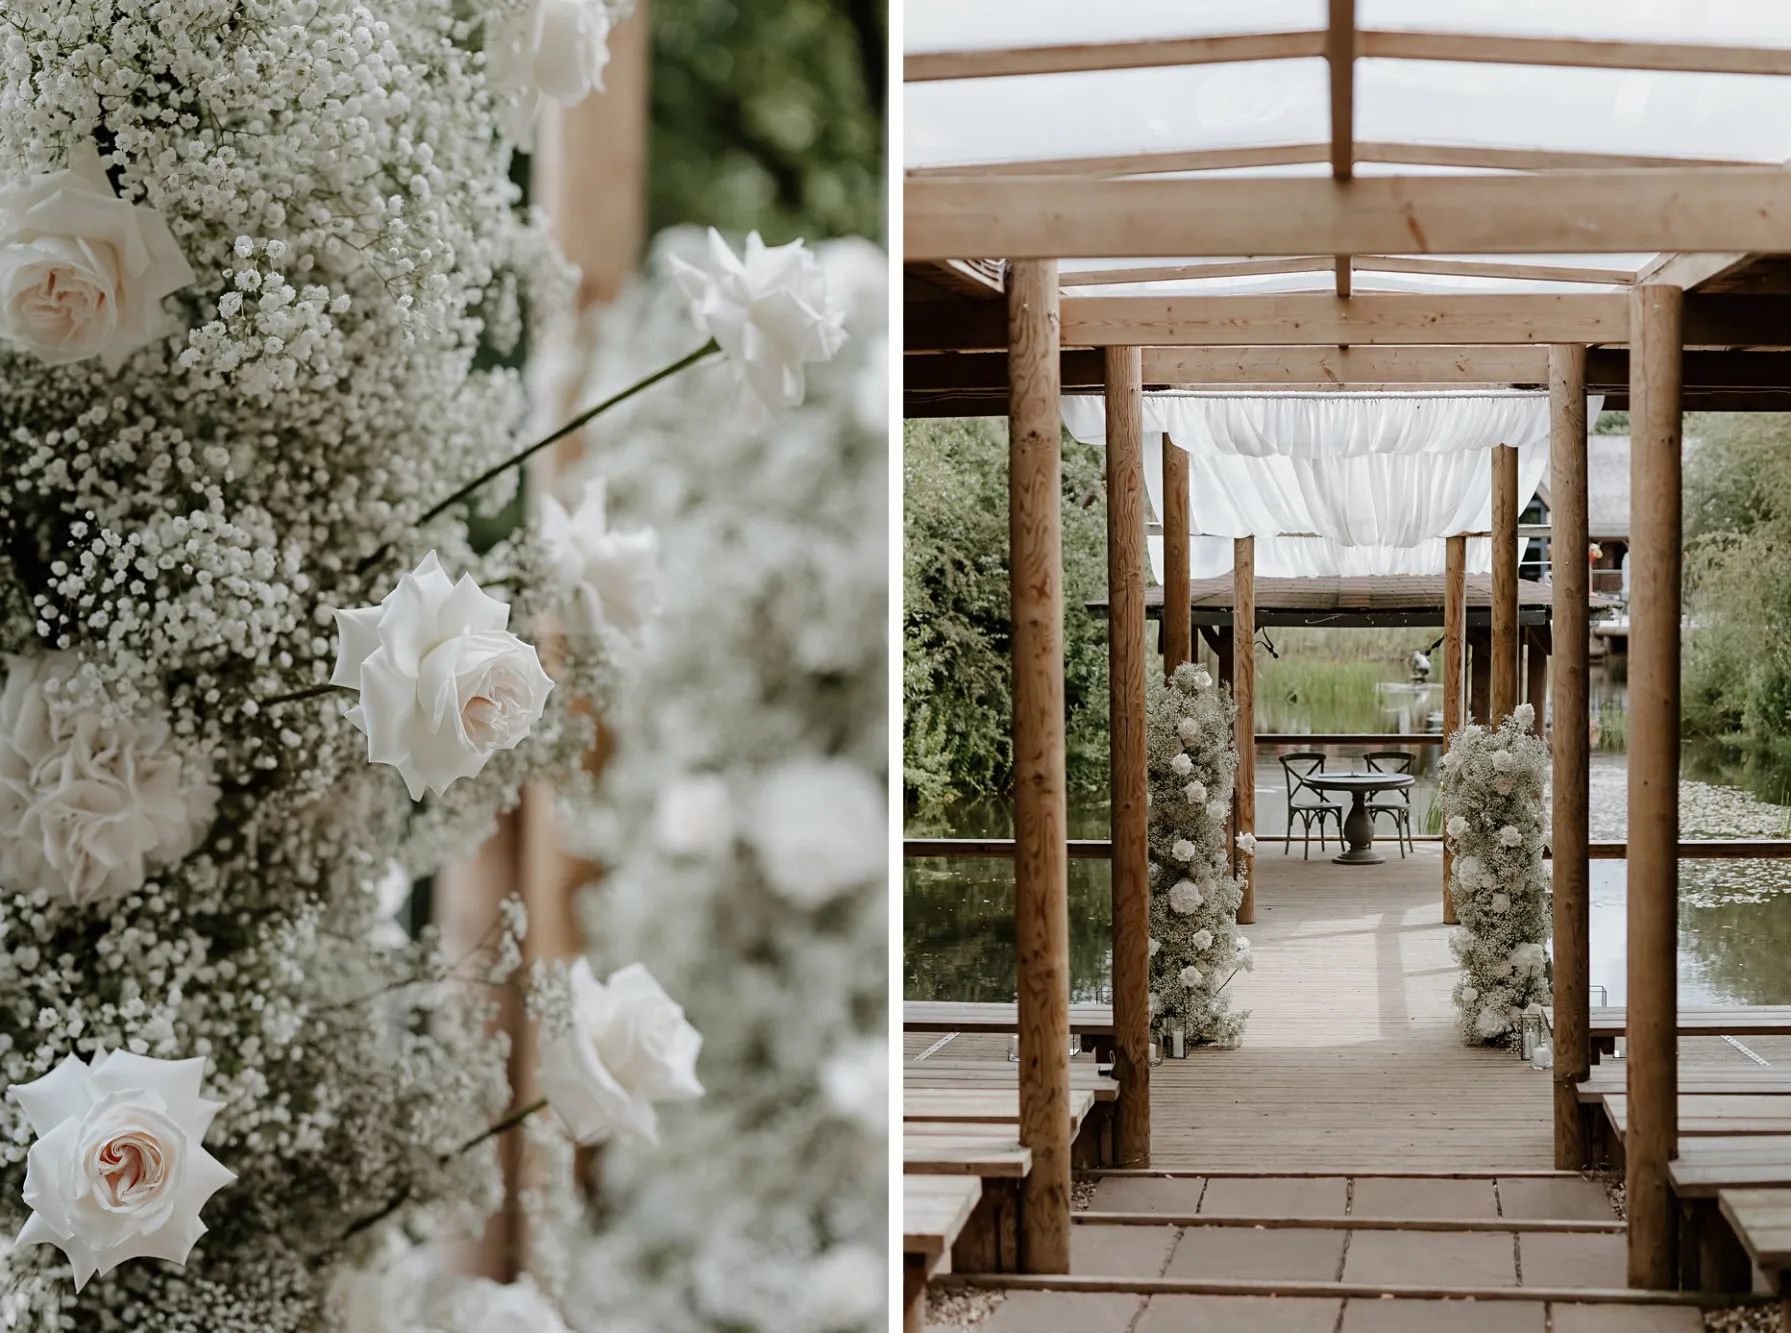 Wedding styling at the pavilion outdoor ceremony at Oaklands. The ceremony area is made of light wood and overlooks a large lake. The area has been styled with white roses and gypsophila flowers.